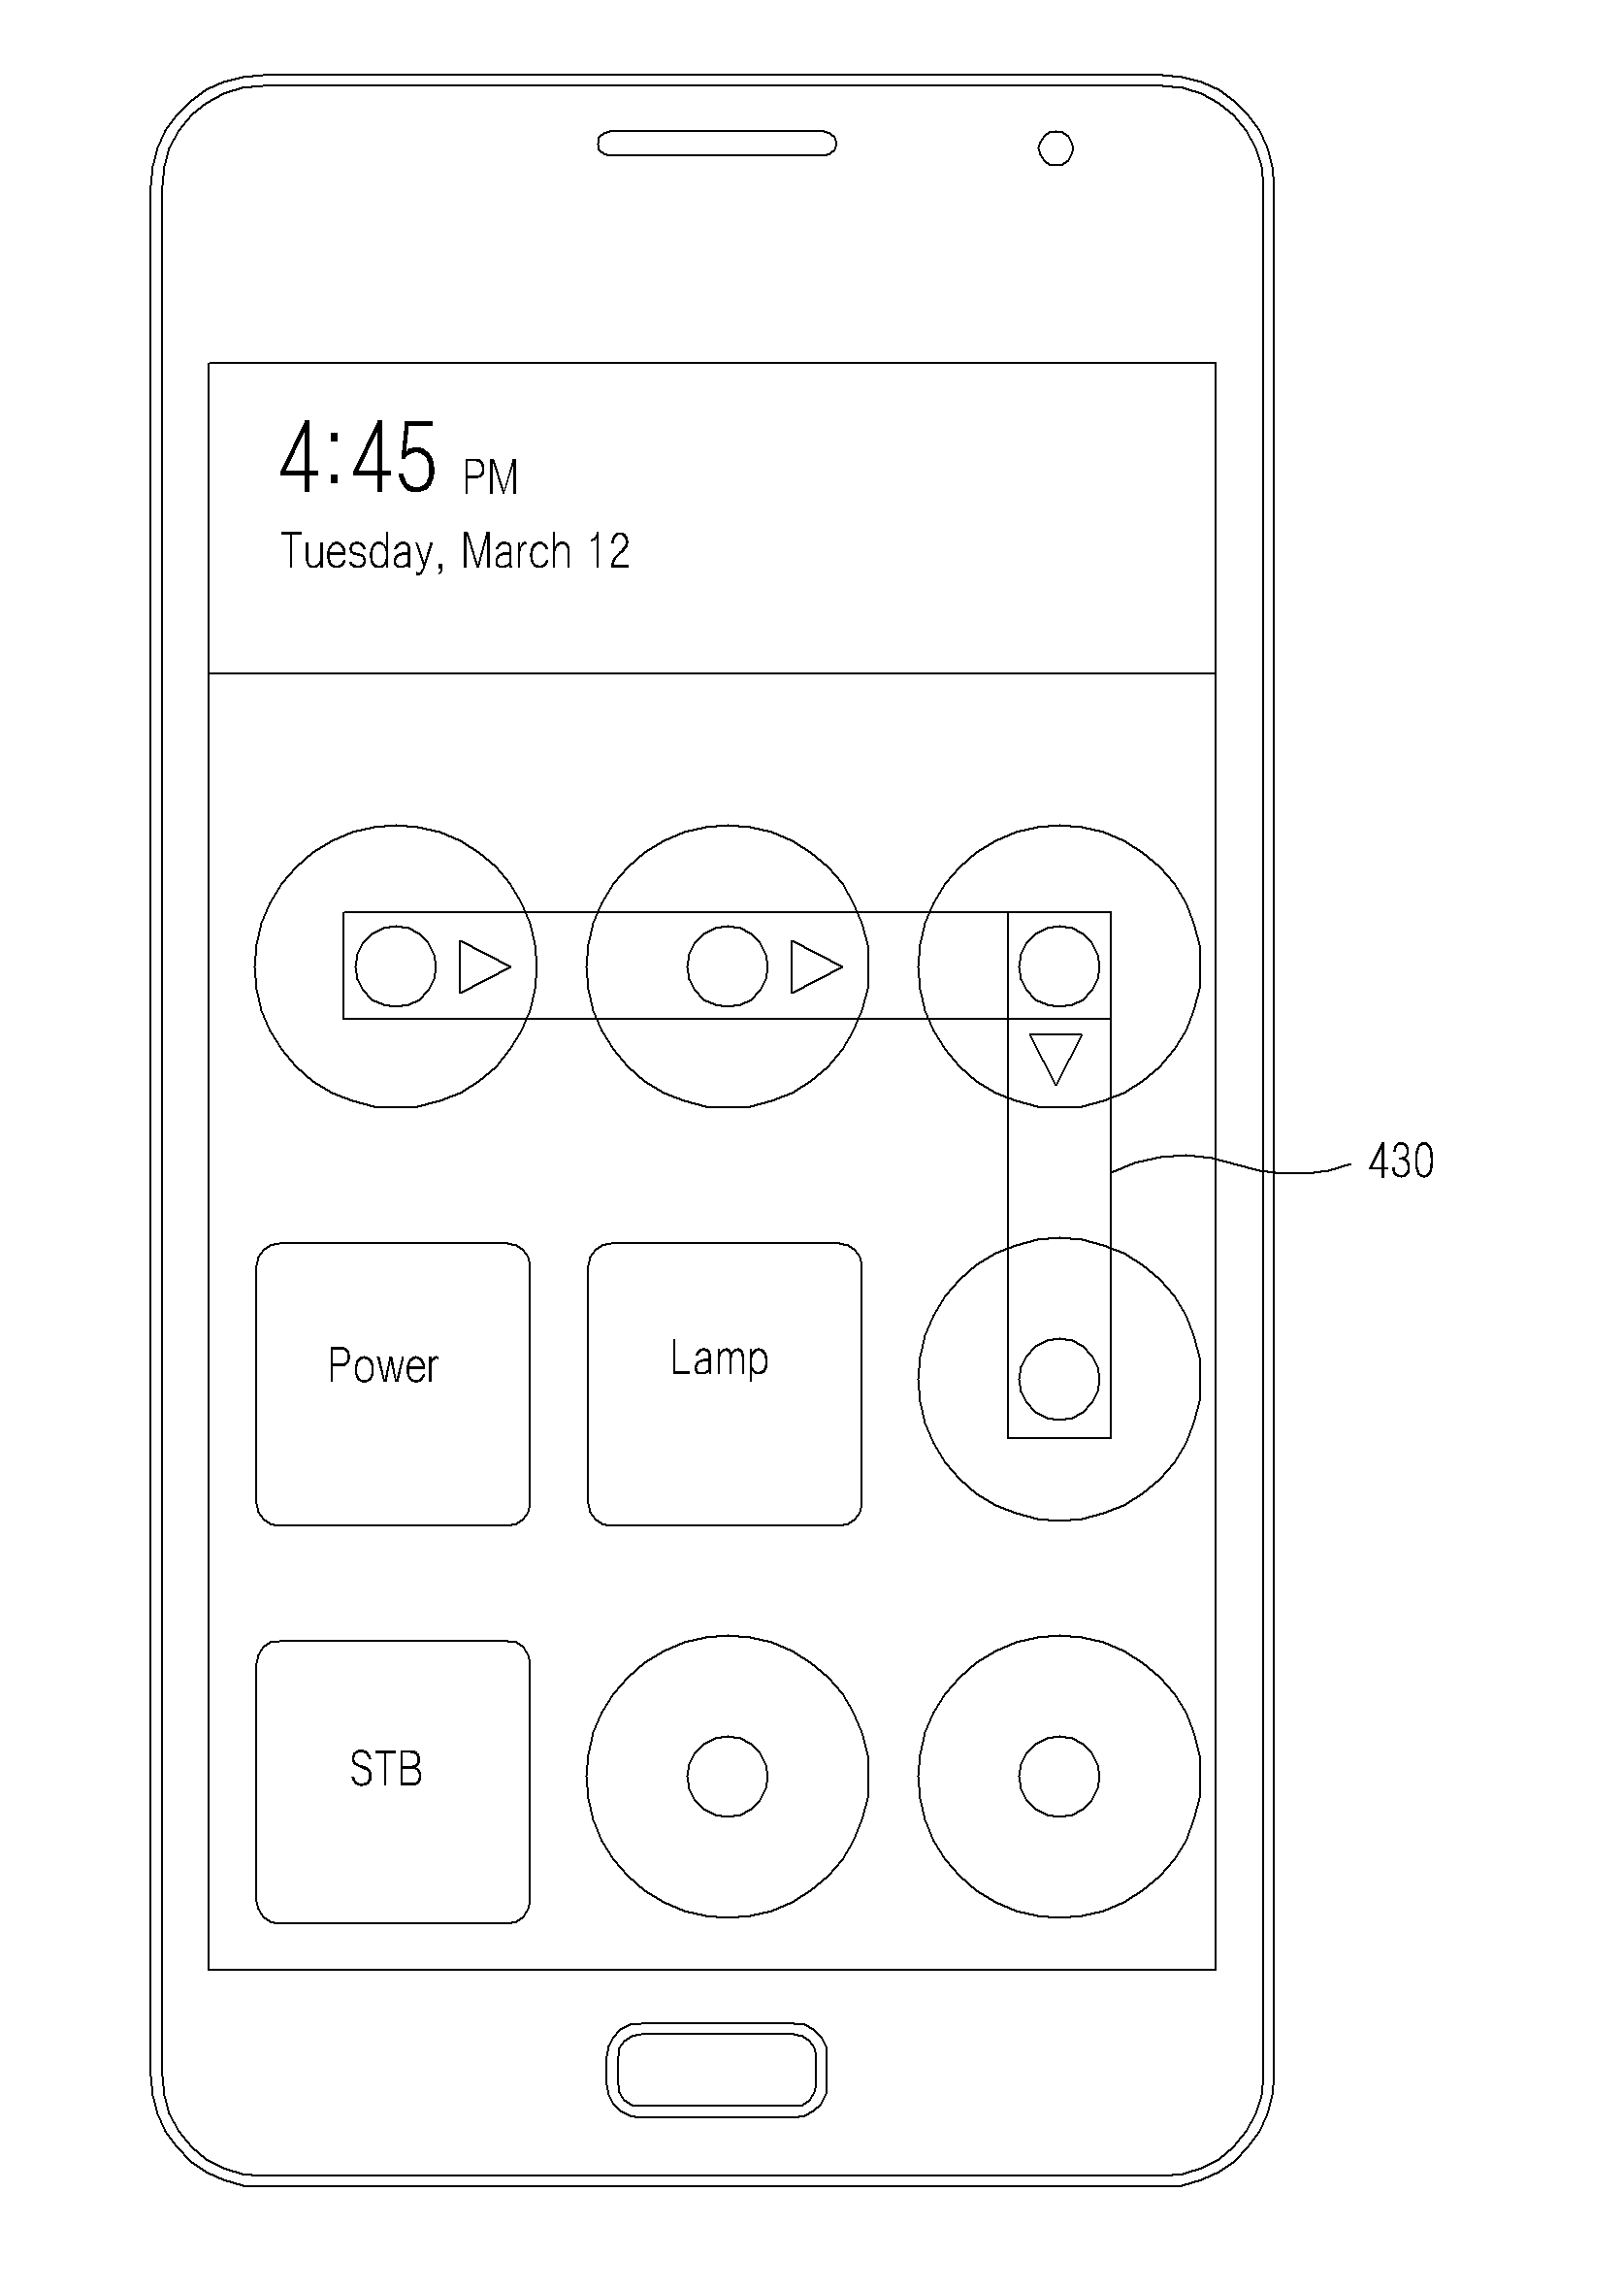 Method for invoking application in screen lock environment